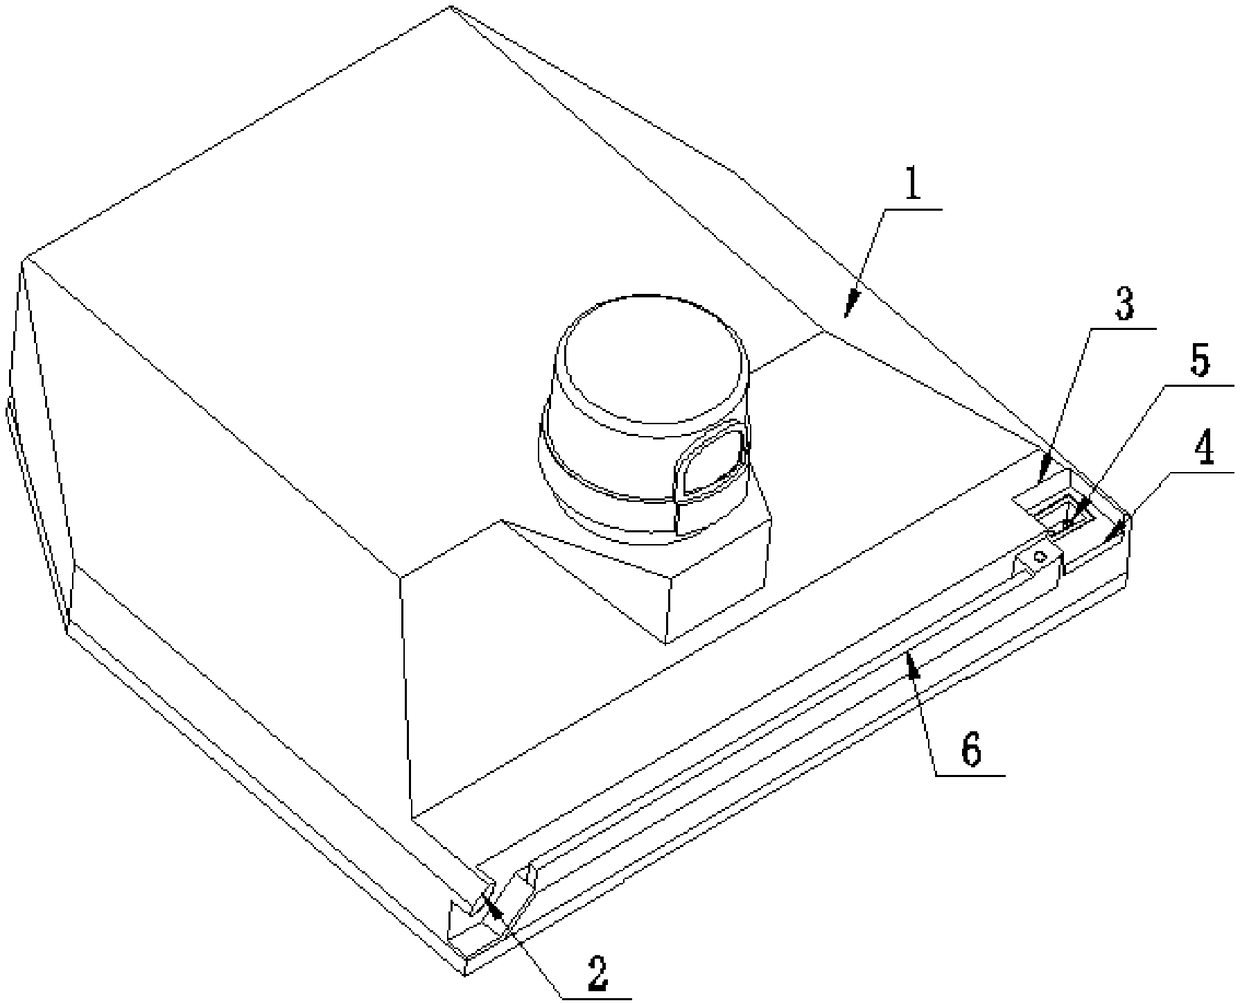 Novel lamp module with rapid structural and electrical connection function